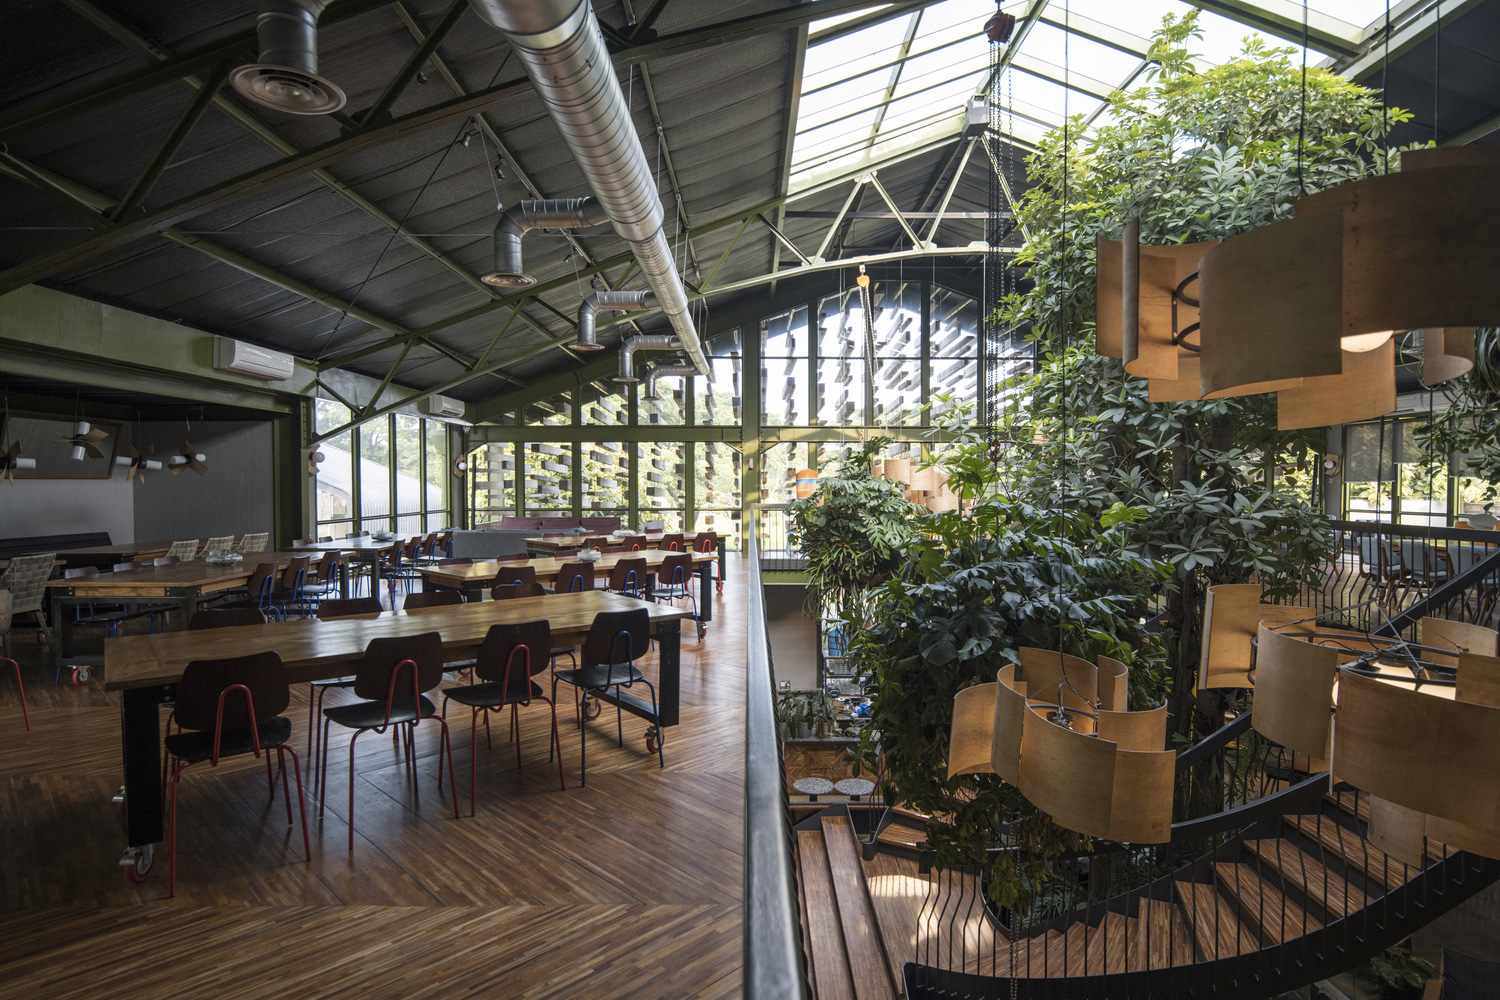 Tropical plants grow inside this jungle-themed restaurant just outside Jakarta